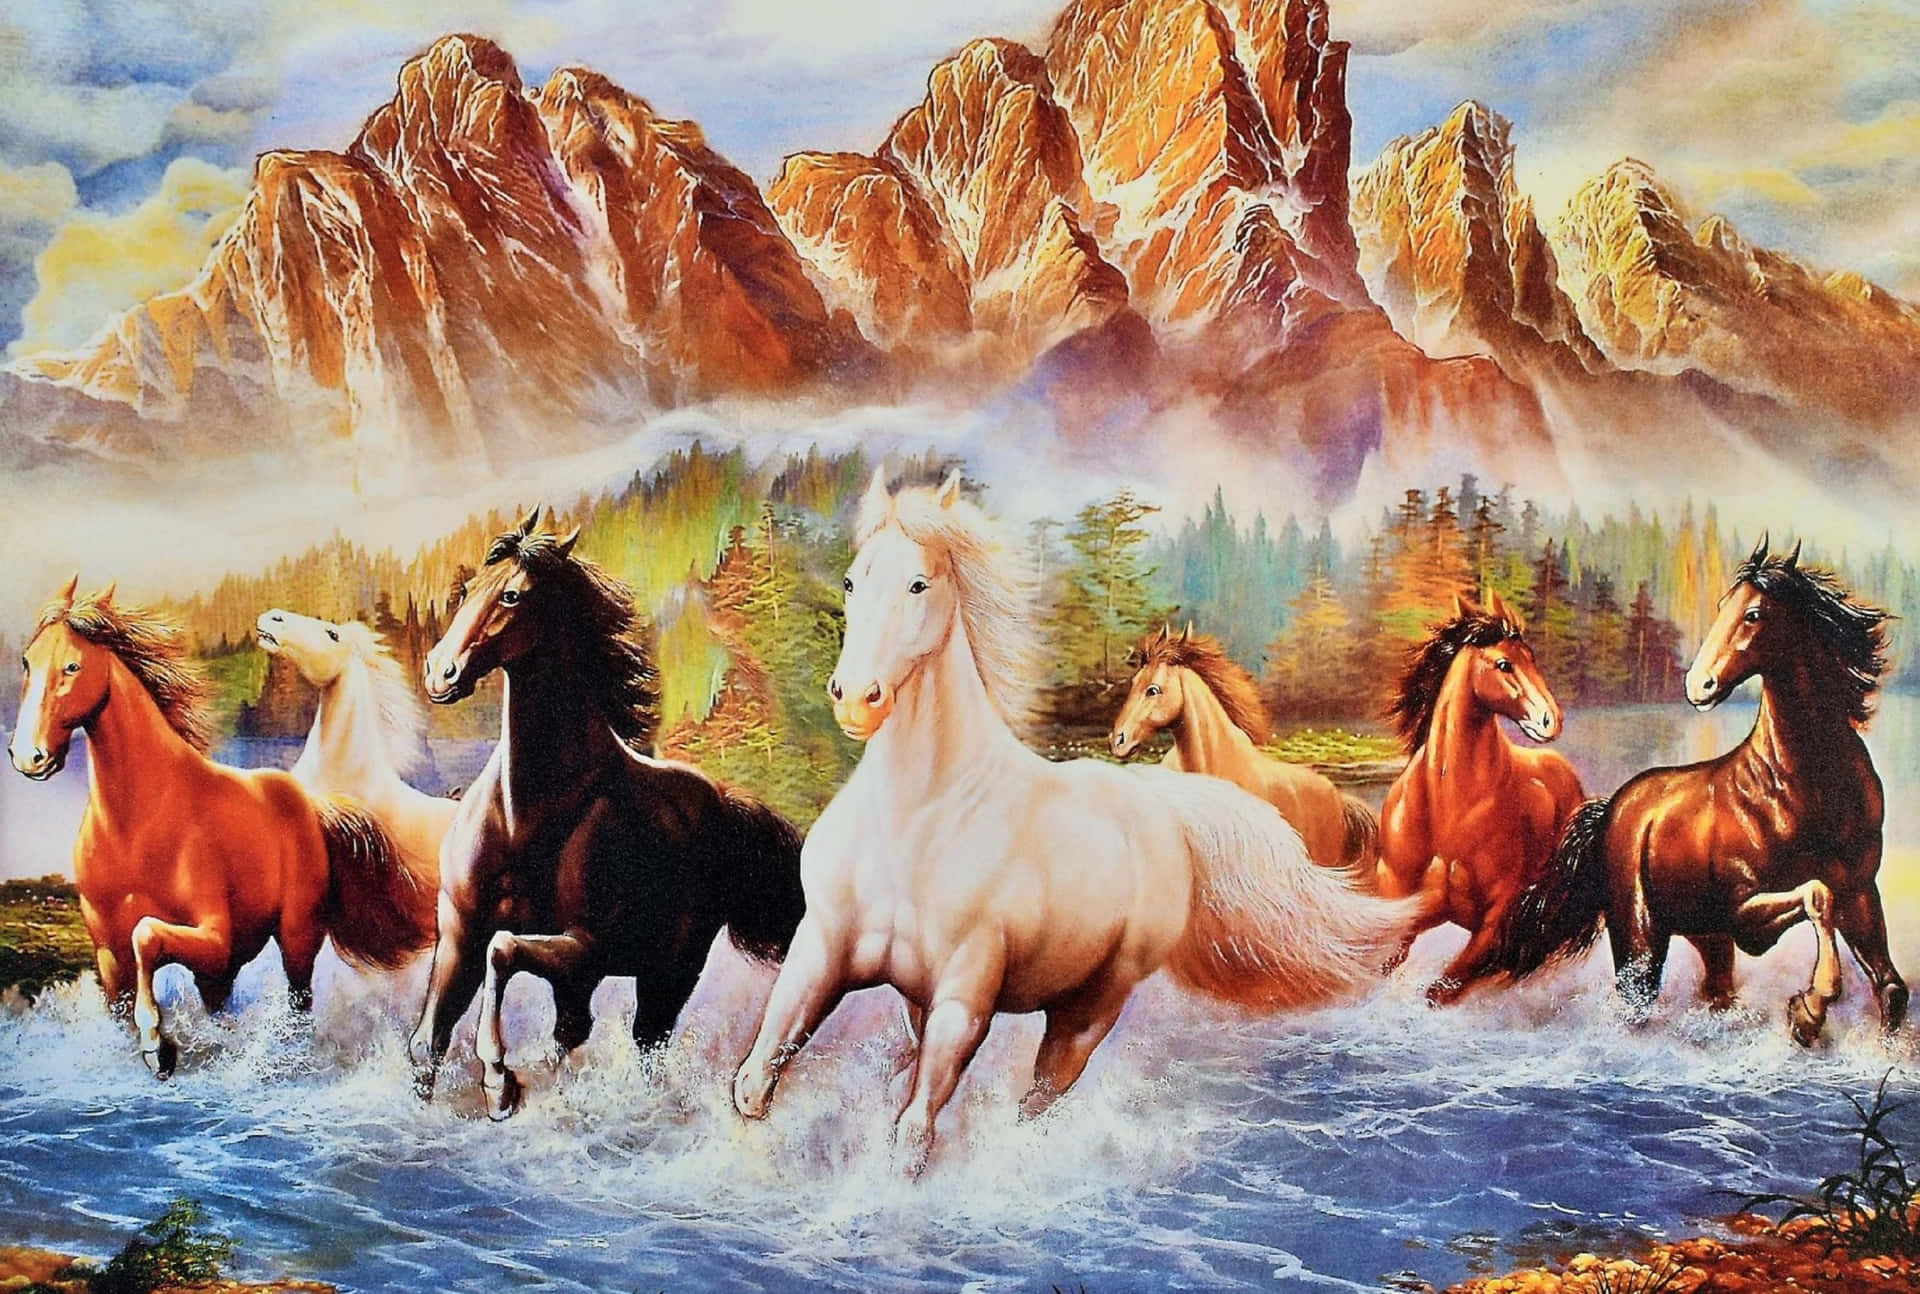 Free 7 Horses Wallpaper Downloads, [100+] 7 Horses Wallpapers for FREE |  